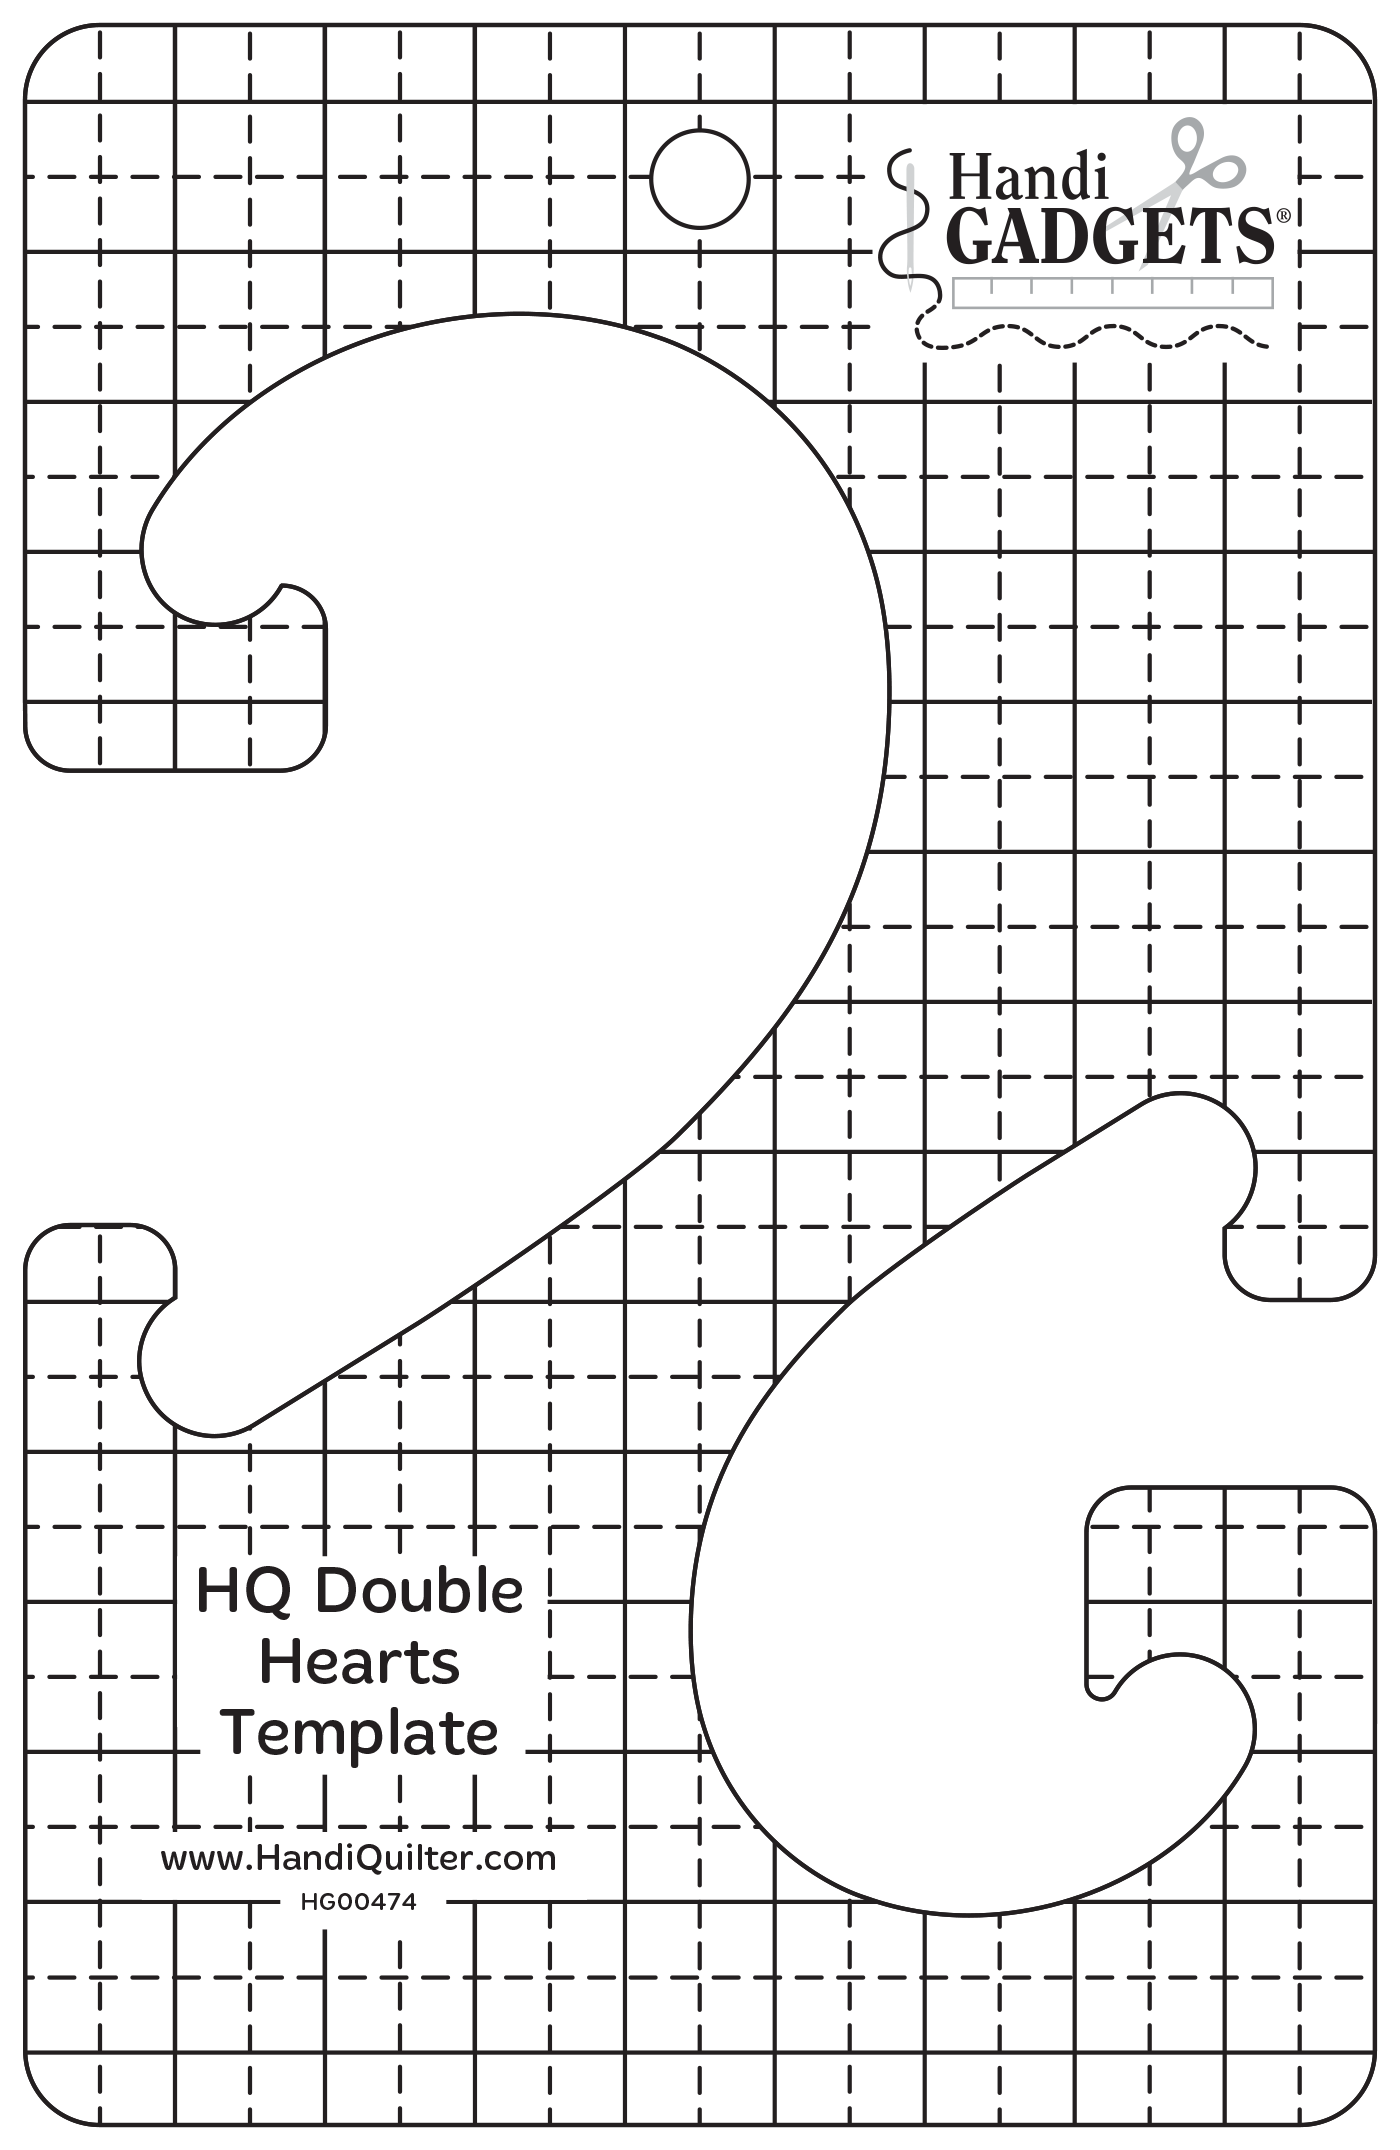 HQ Double Hearts Template